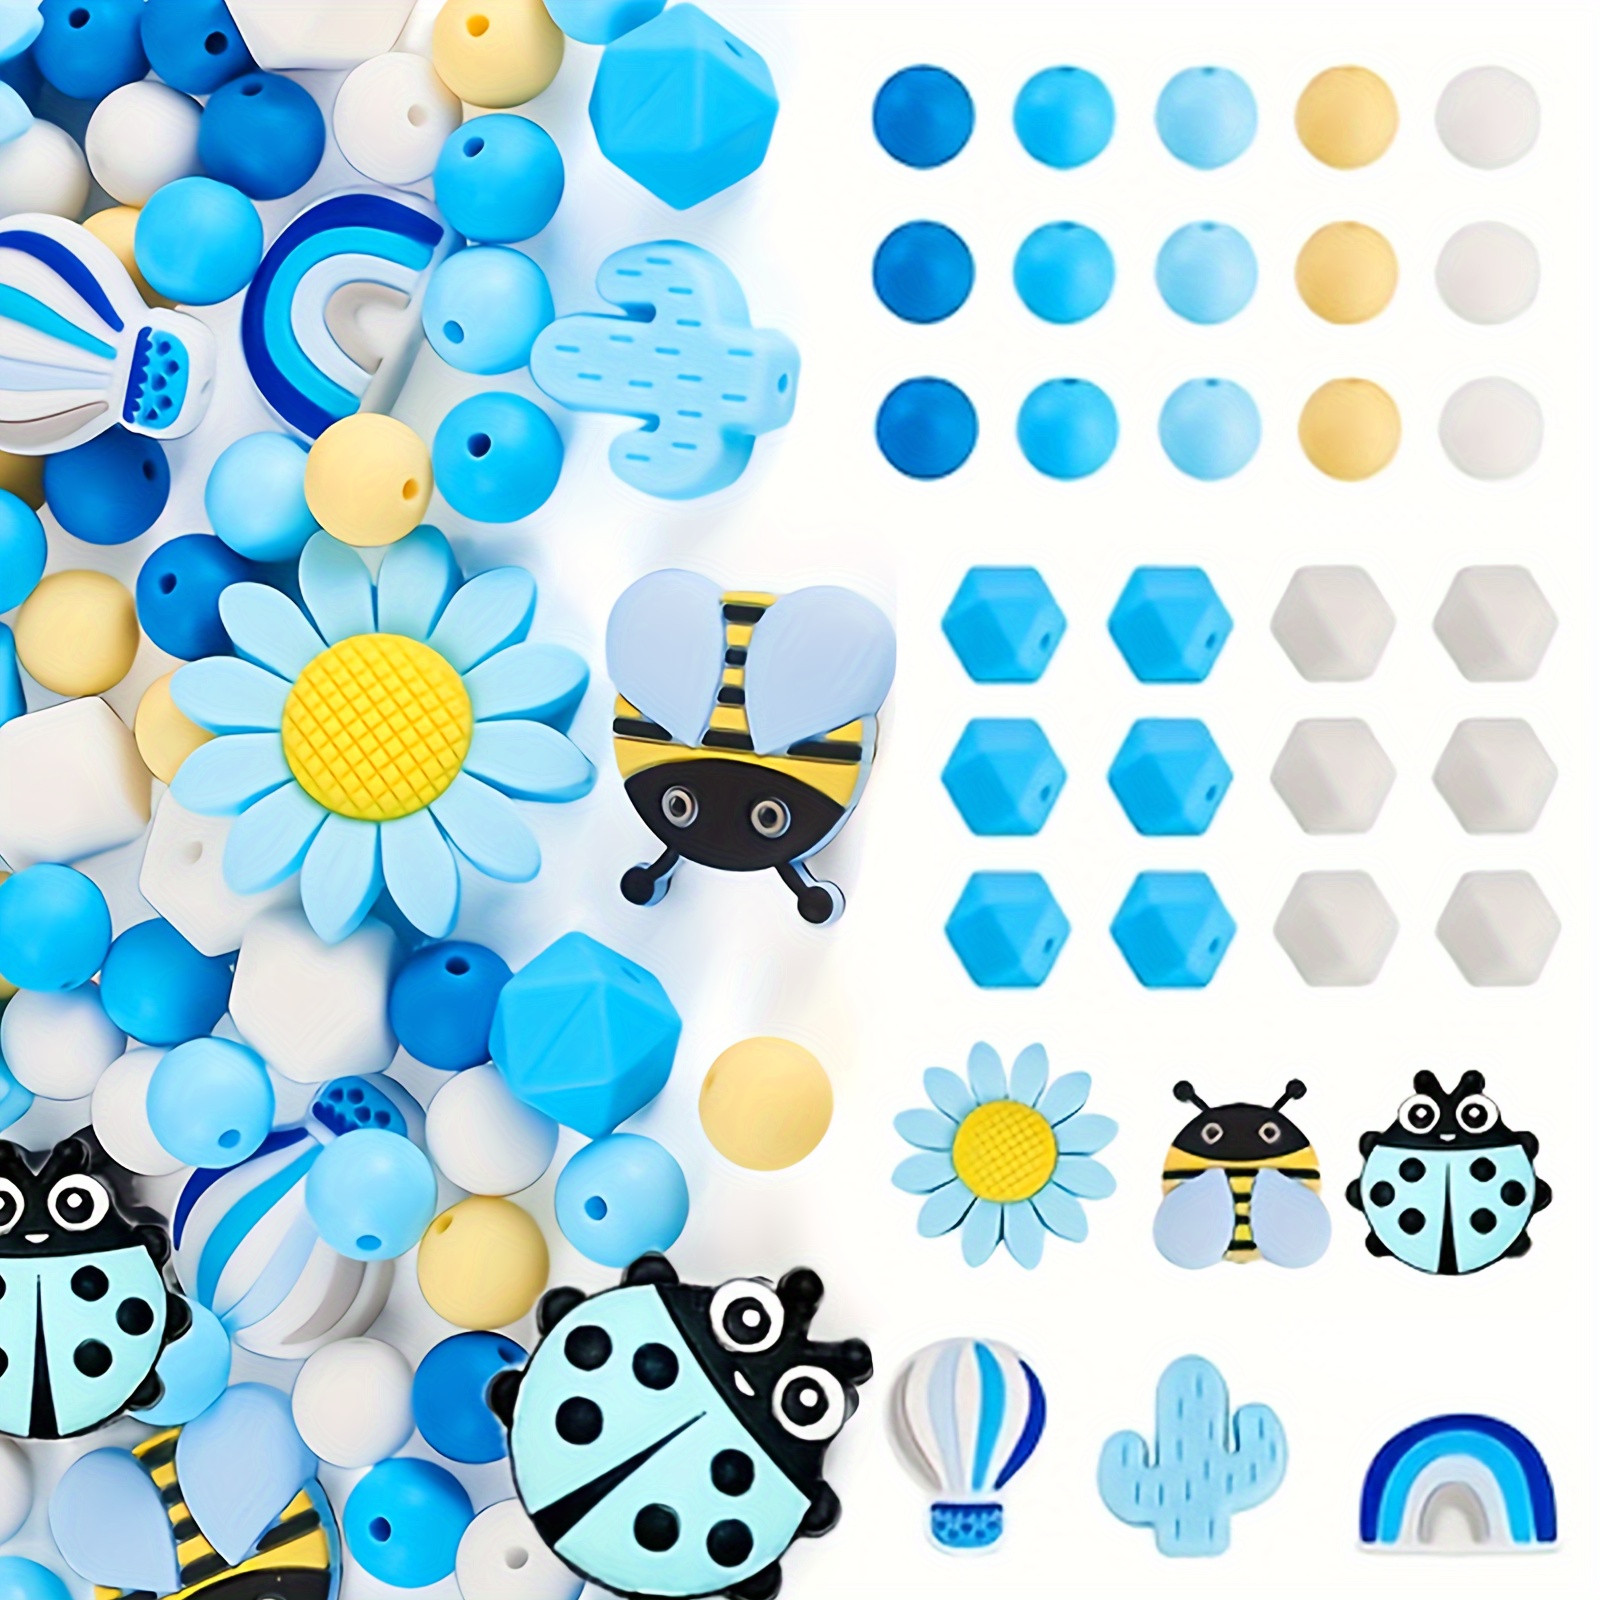 

41pcs Blue Silicone Beading Keychain Jewelry Making Kit, 12mm Round Beads With Cactus, Sunflower, Bee, Ladybug Charms For Diy Beaded Decors Crafting Supplies